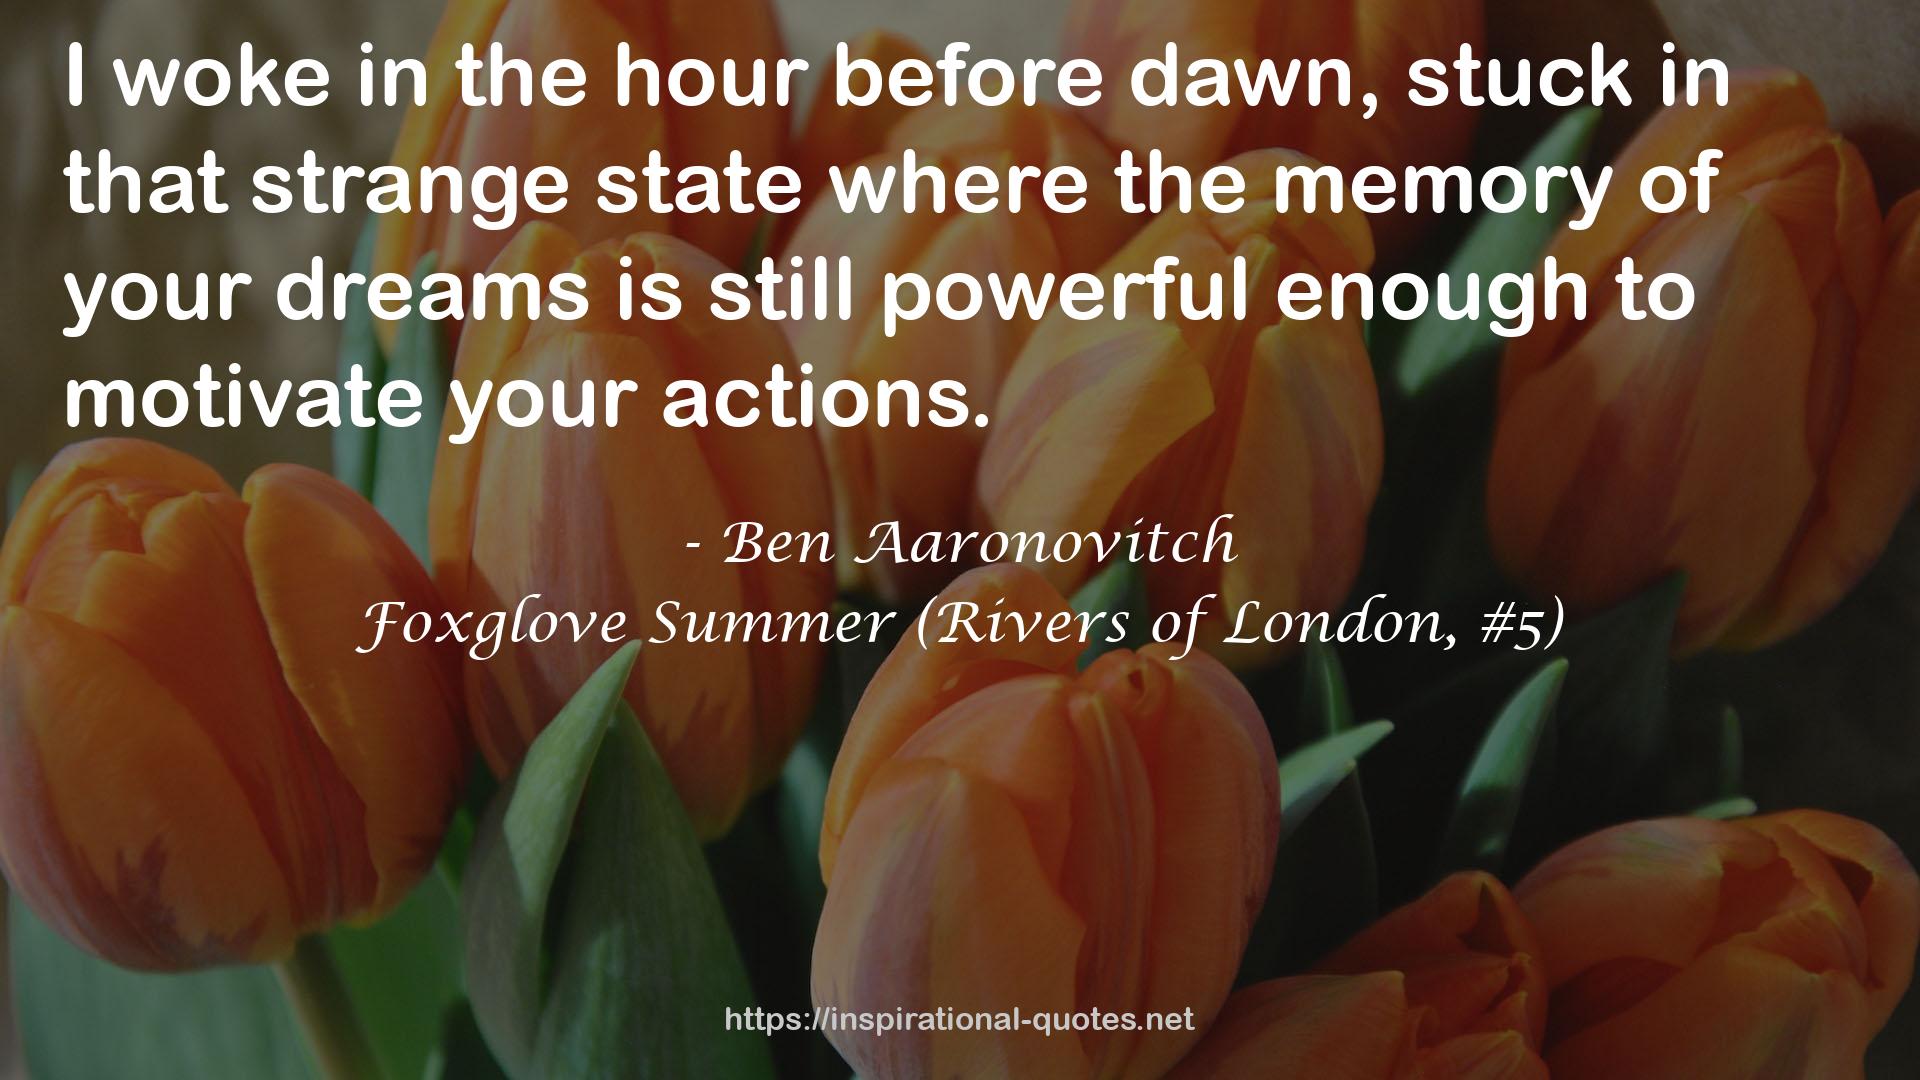 Foxglove Summer (Rivers of London, #5) QUOTES